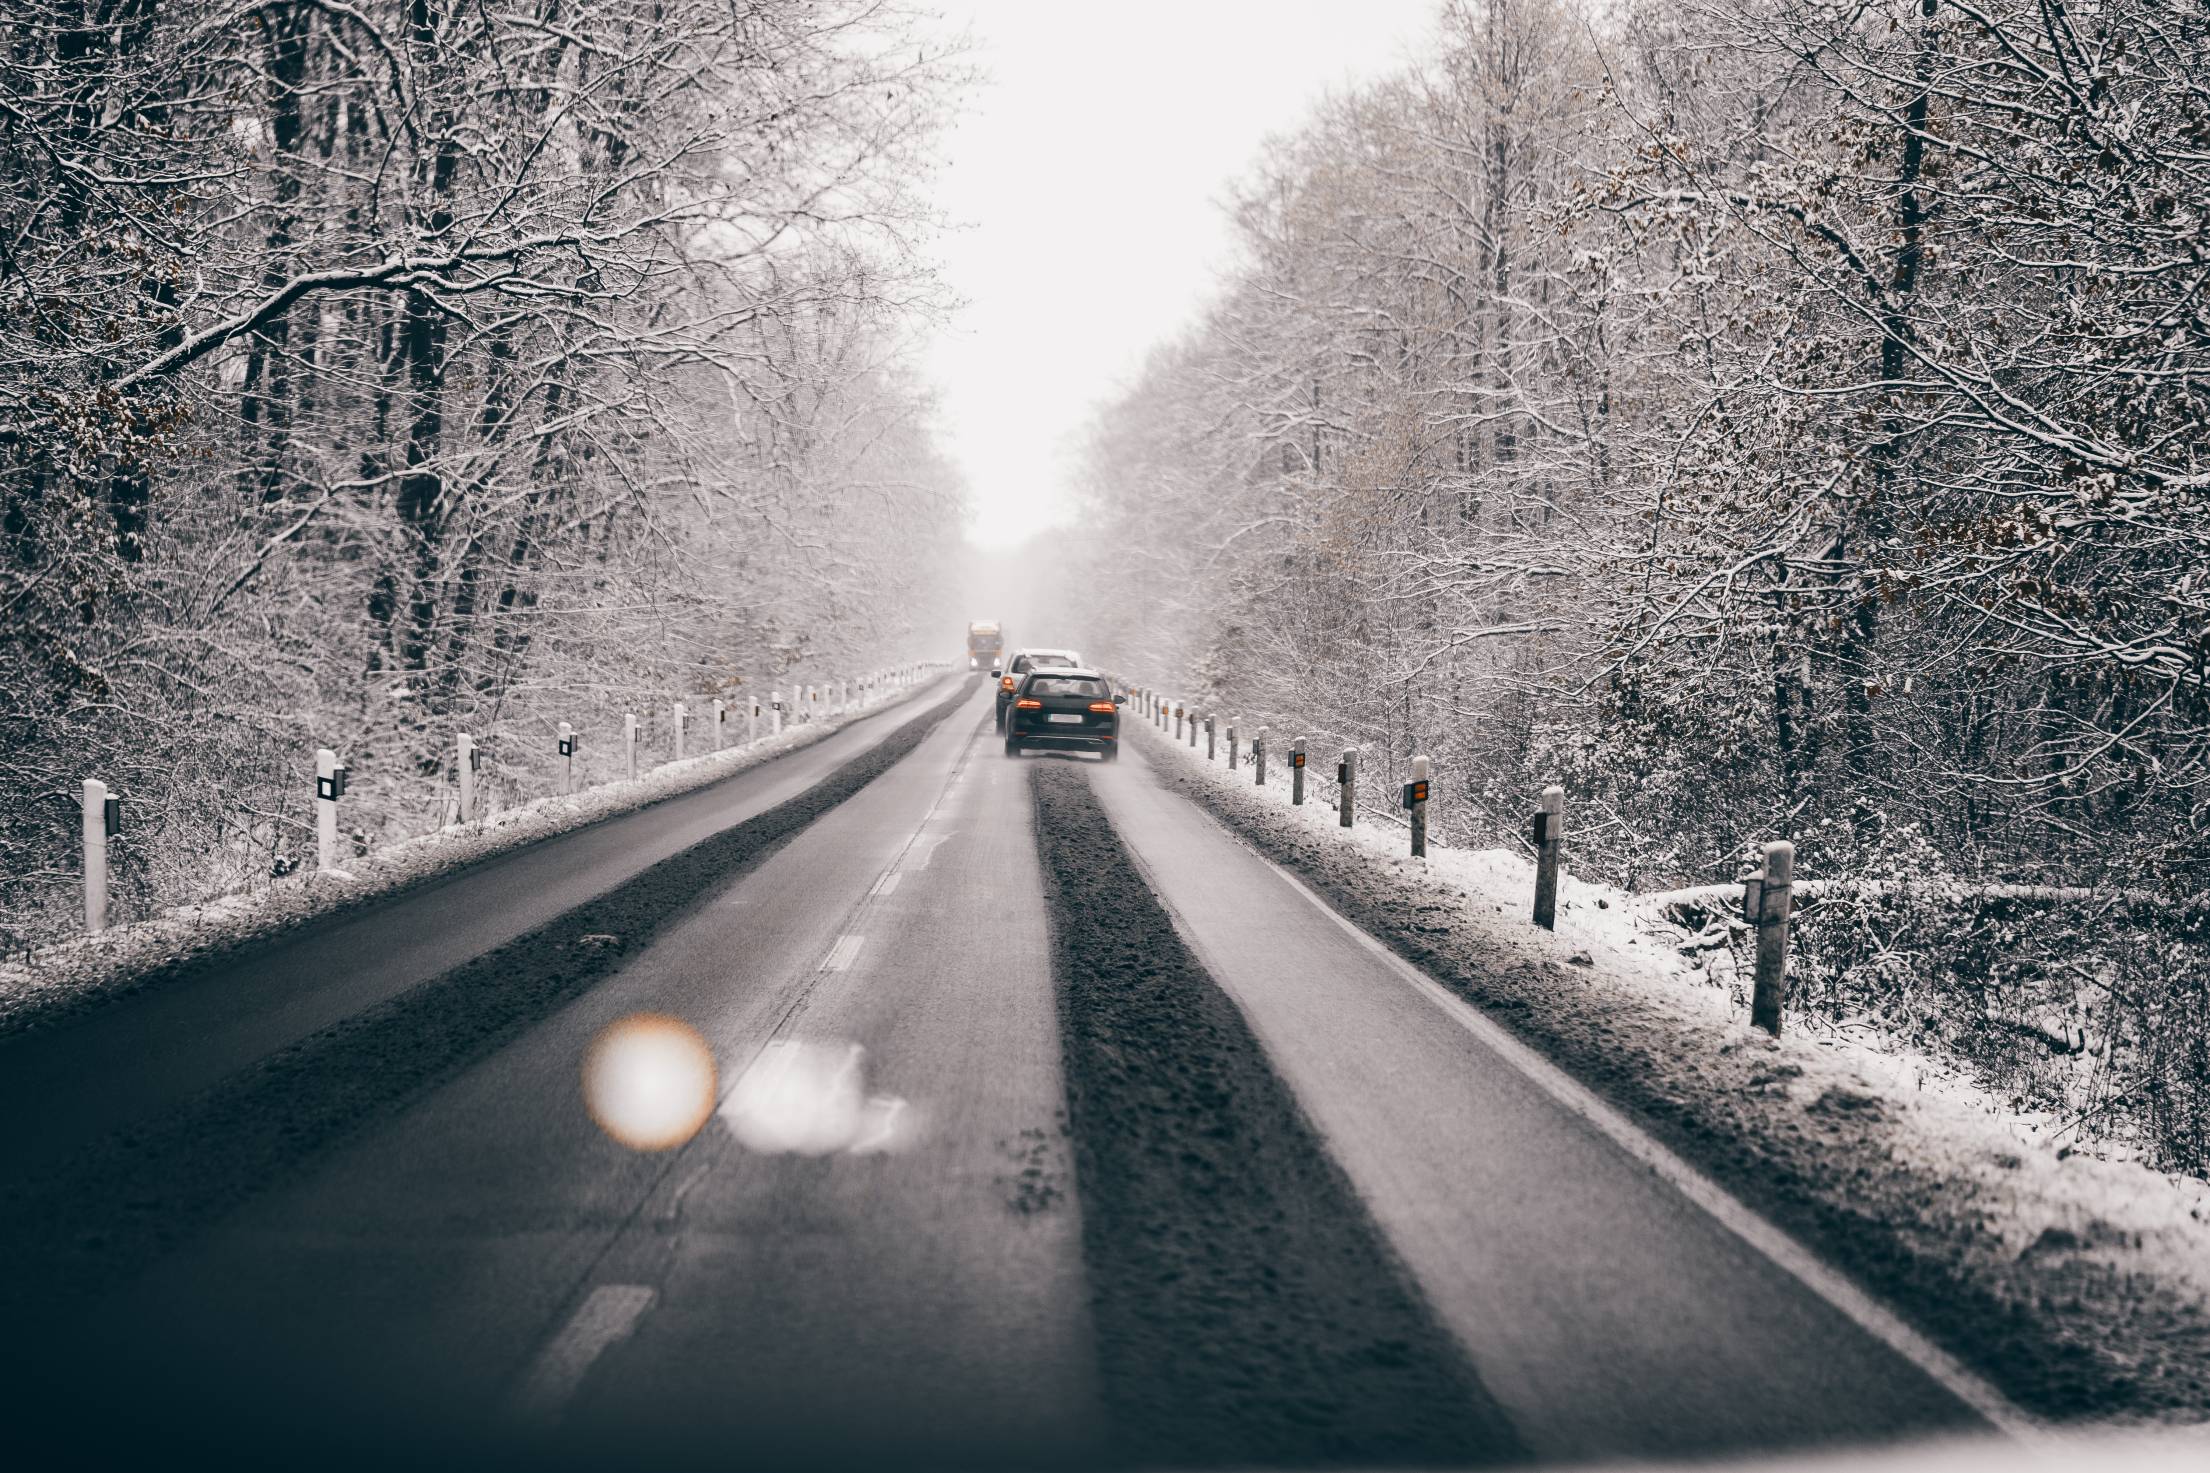 snowy-road-in-the-forest-free-photo.jpg